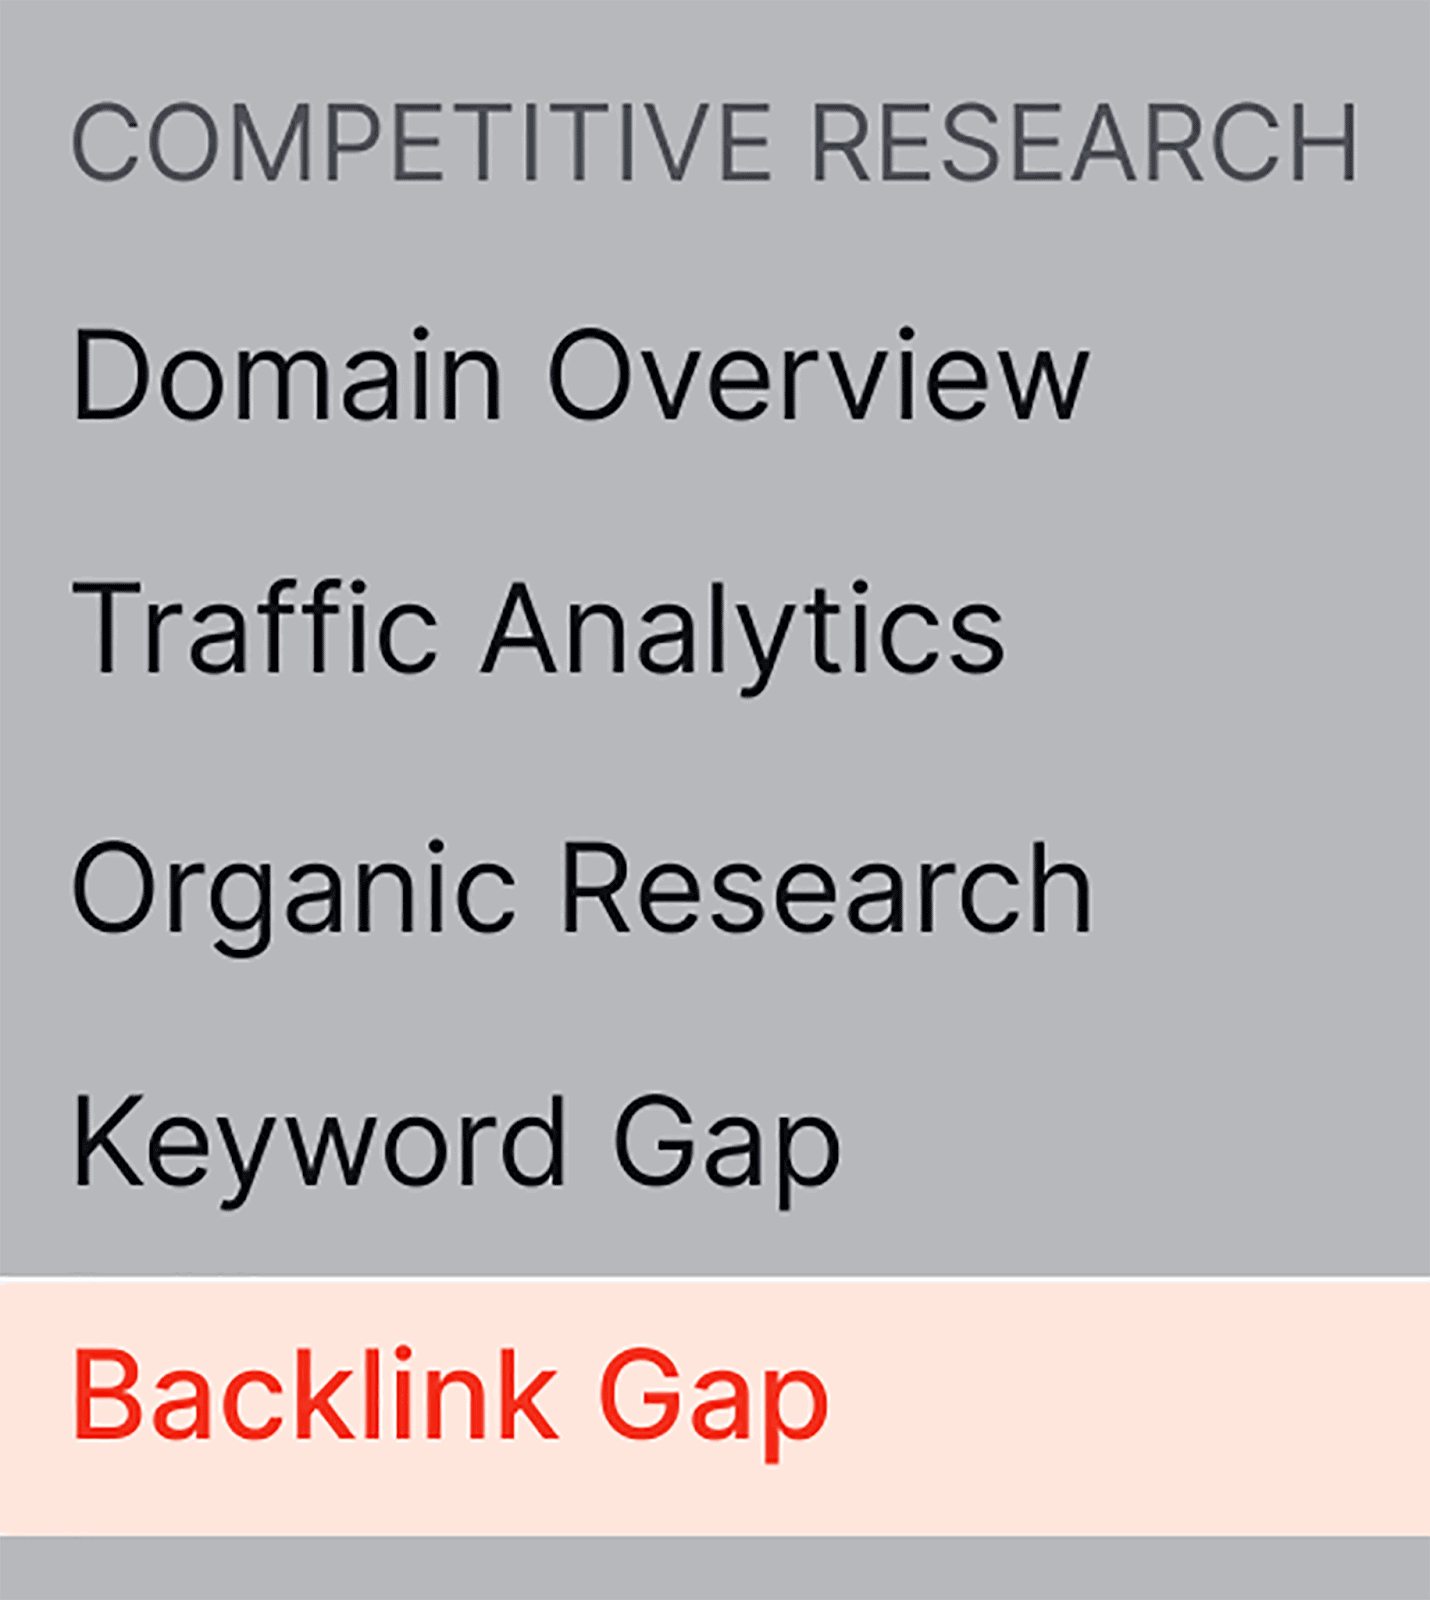 See backlink gap under the competitor research